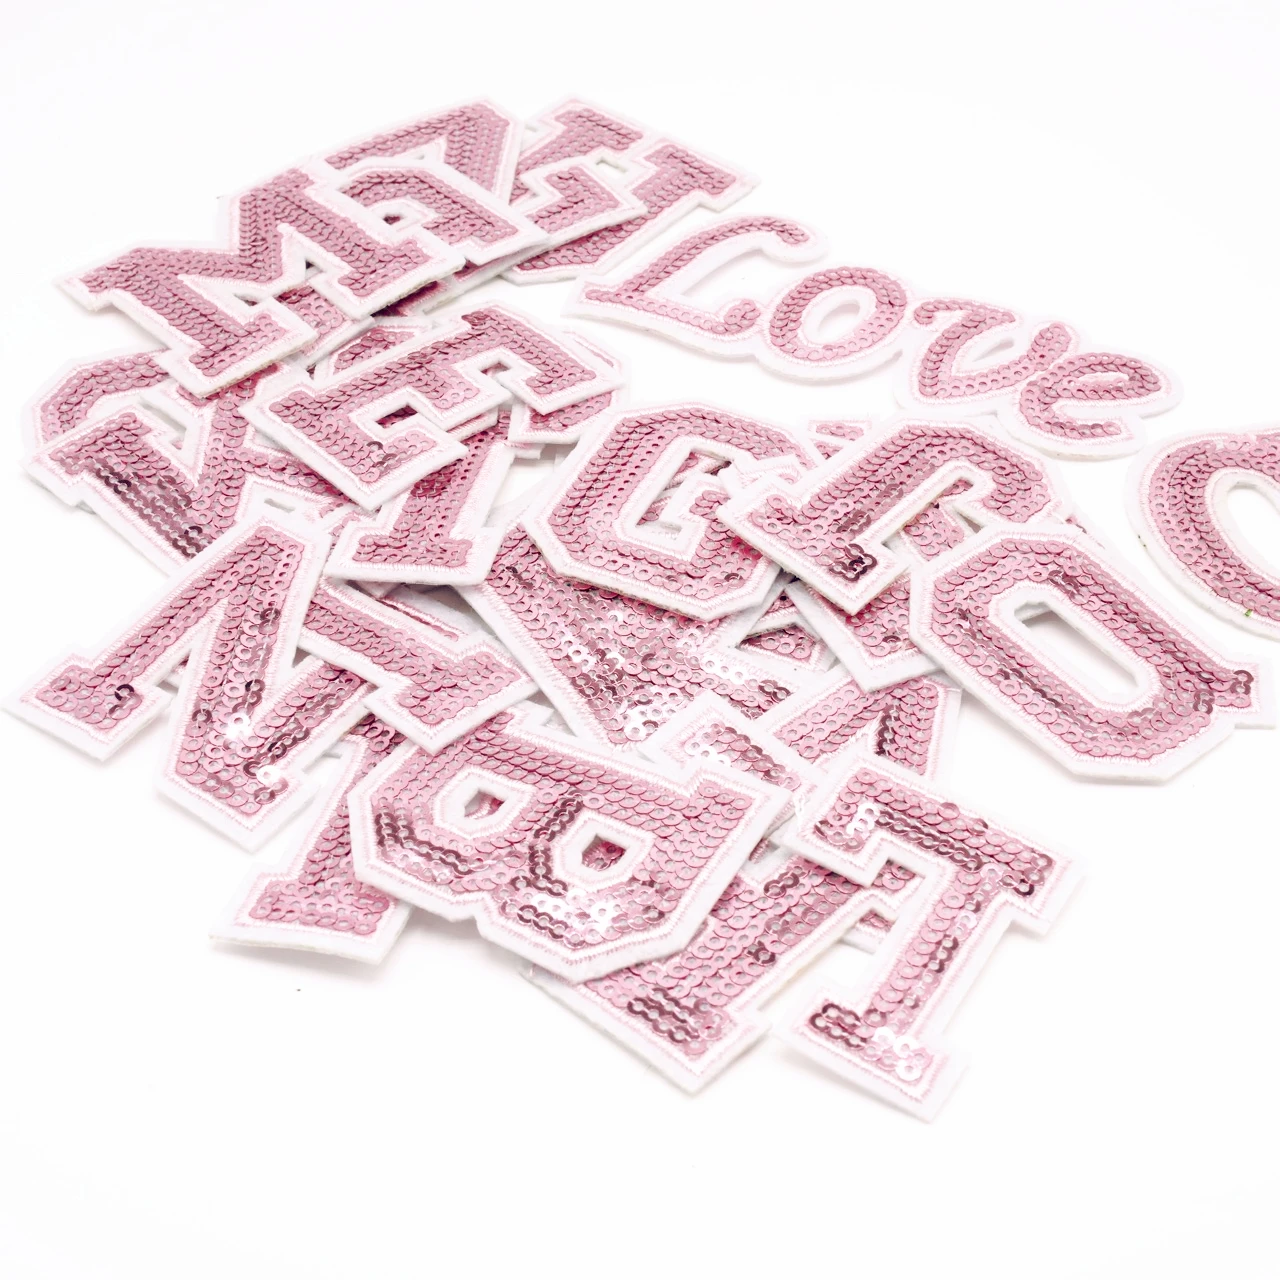 5CM Pink Sequins Letters Patch For Clothes Alphabet Iron on Garment Accessories Embroidered Applique Decoration Repair Patches